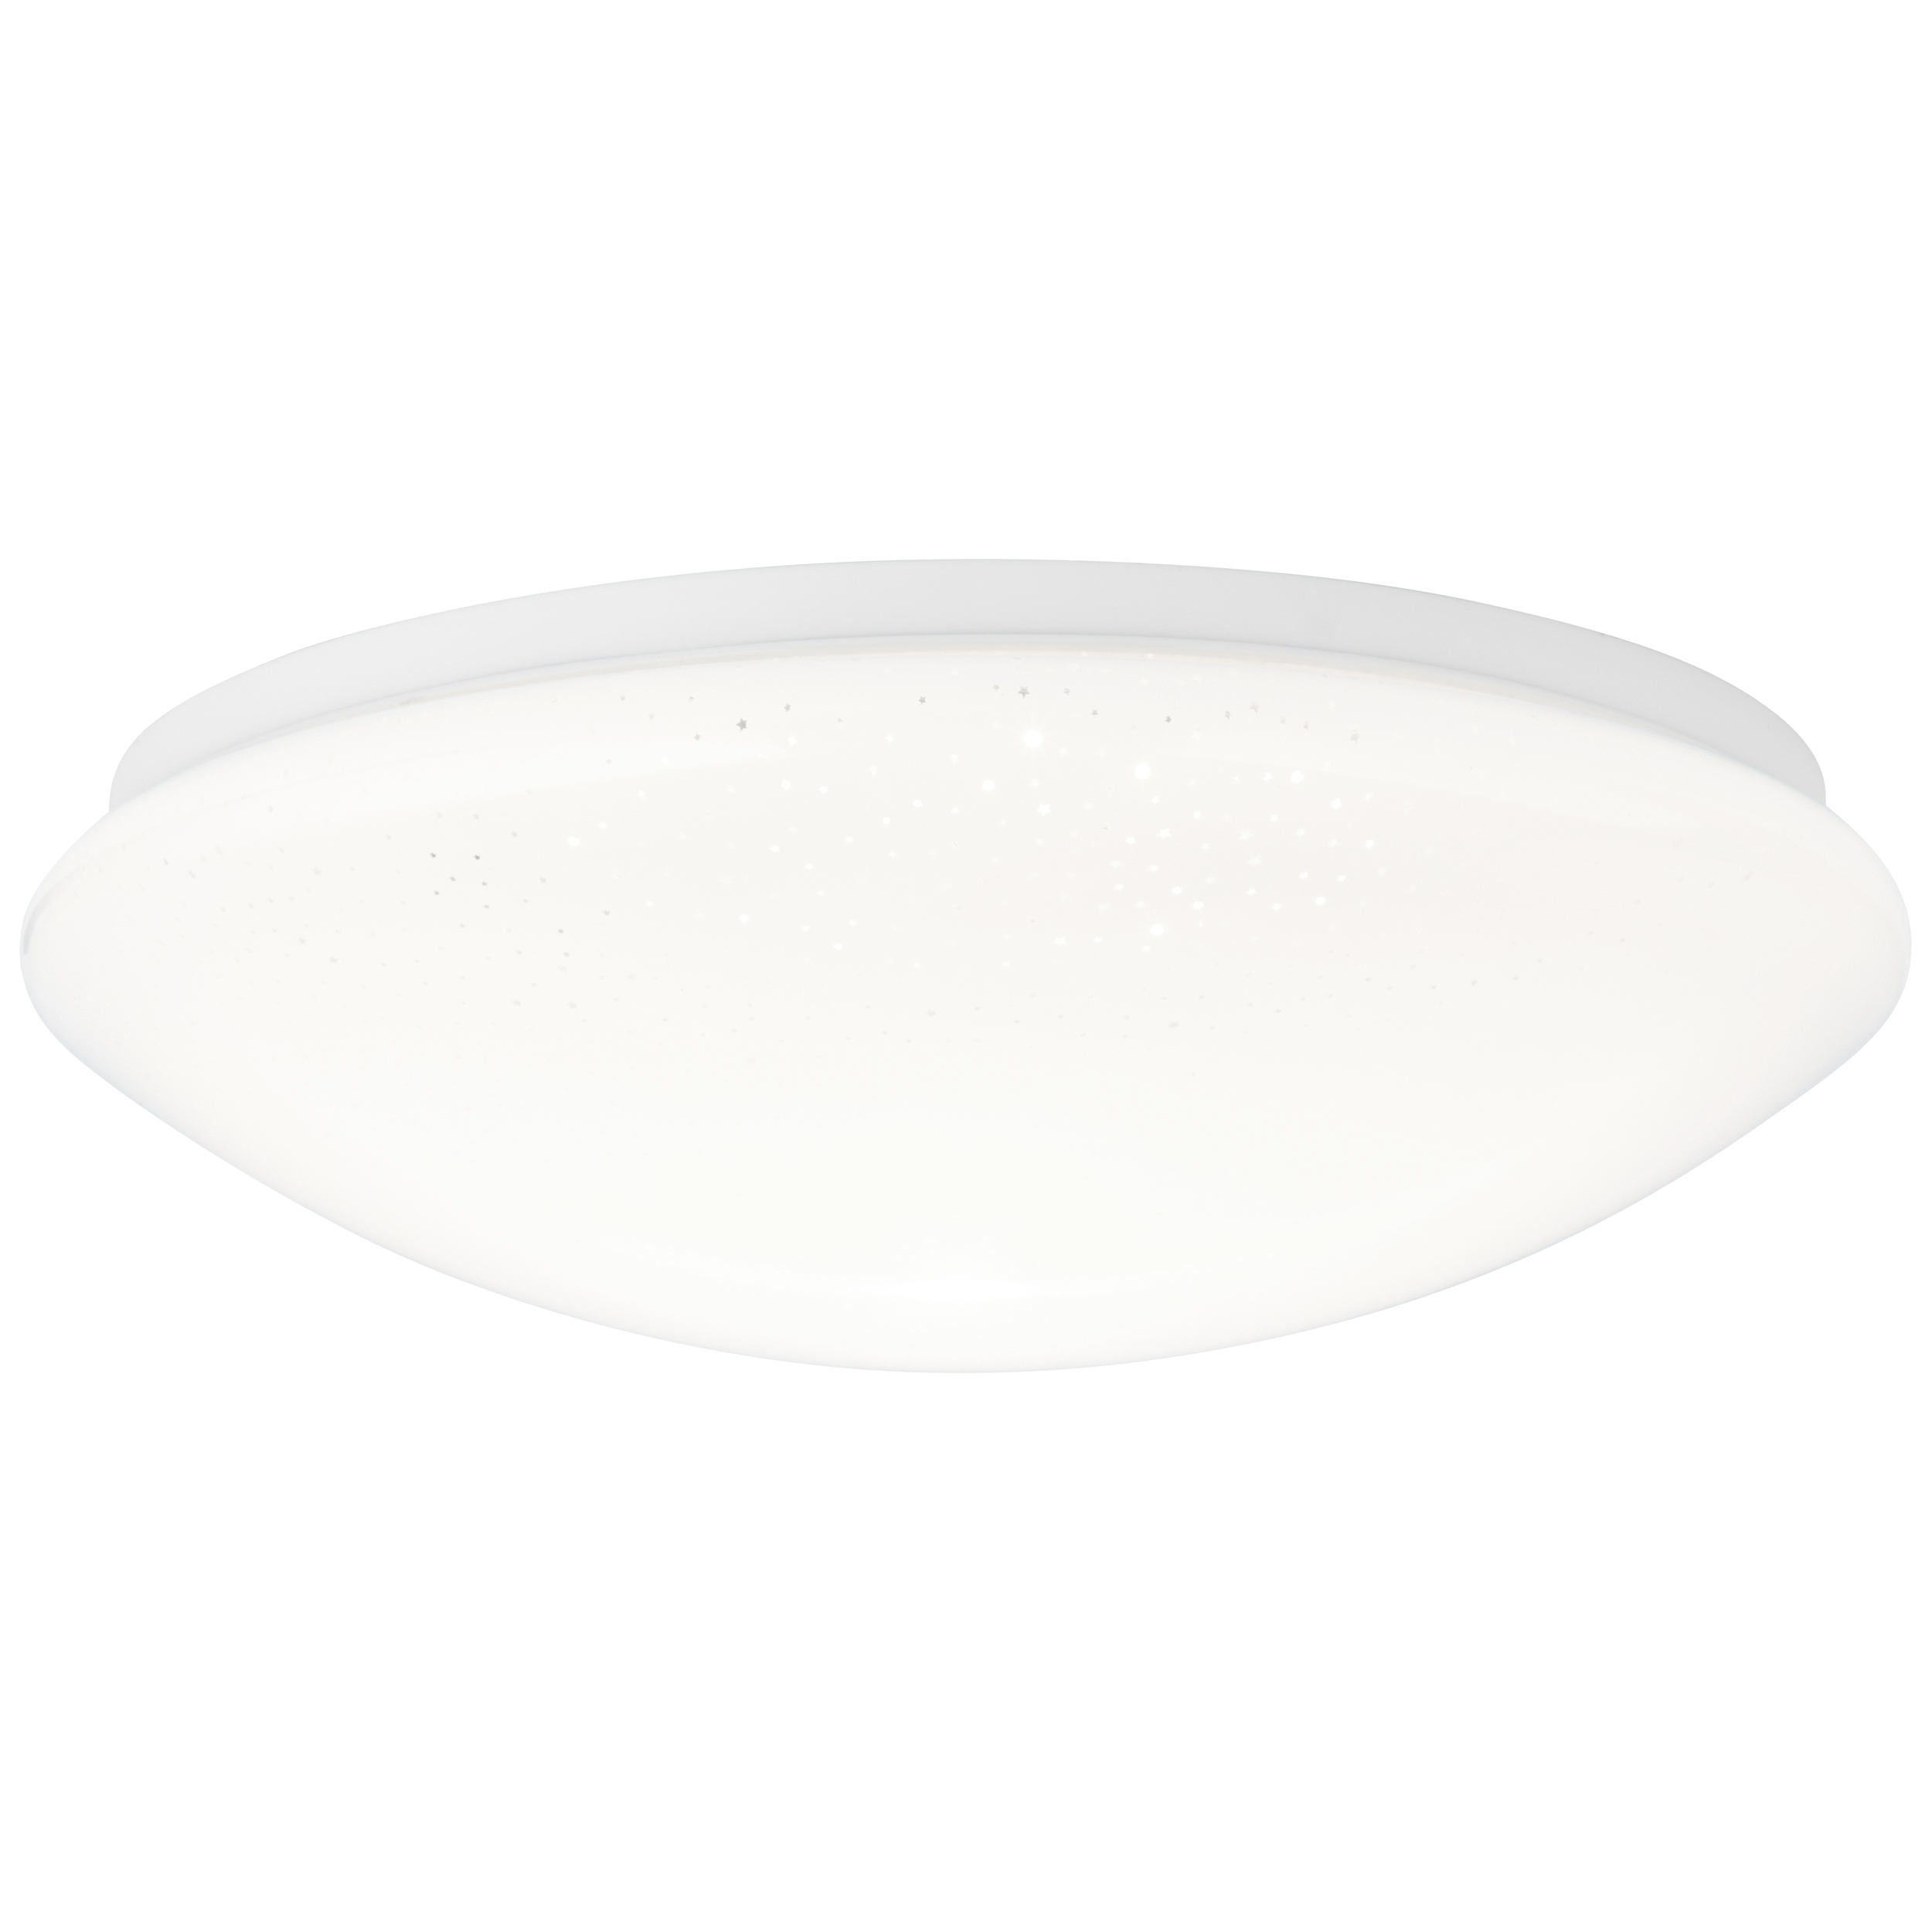 Fakir Starry LED wall and ceiling light 38cm white/cold white